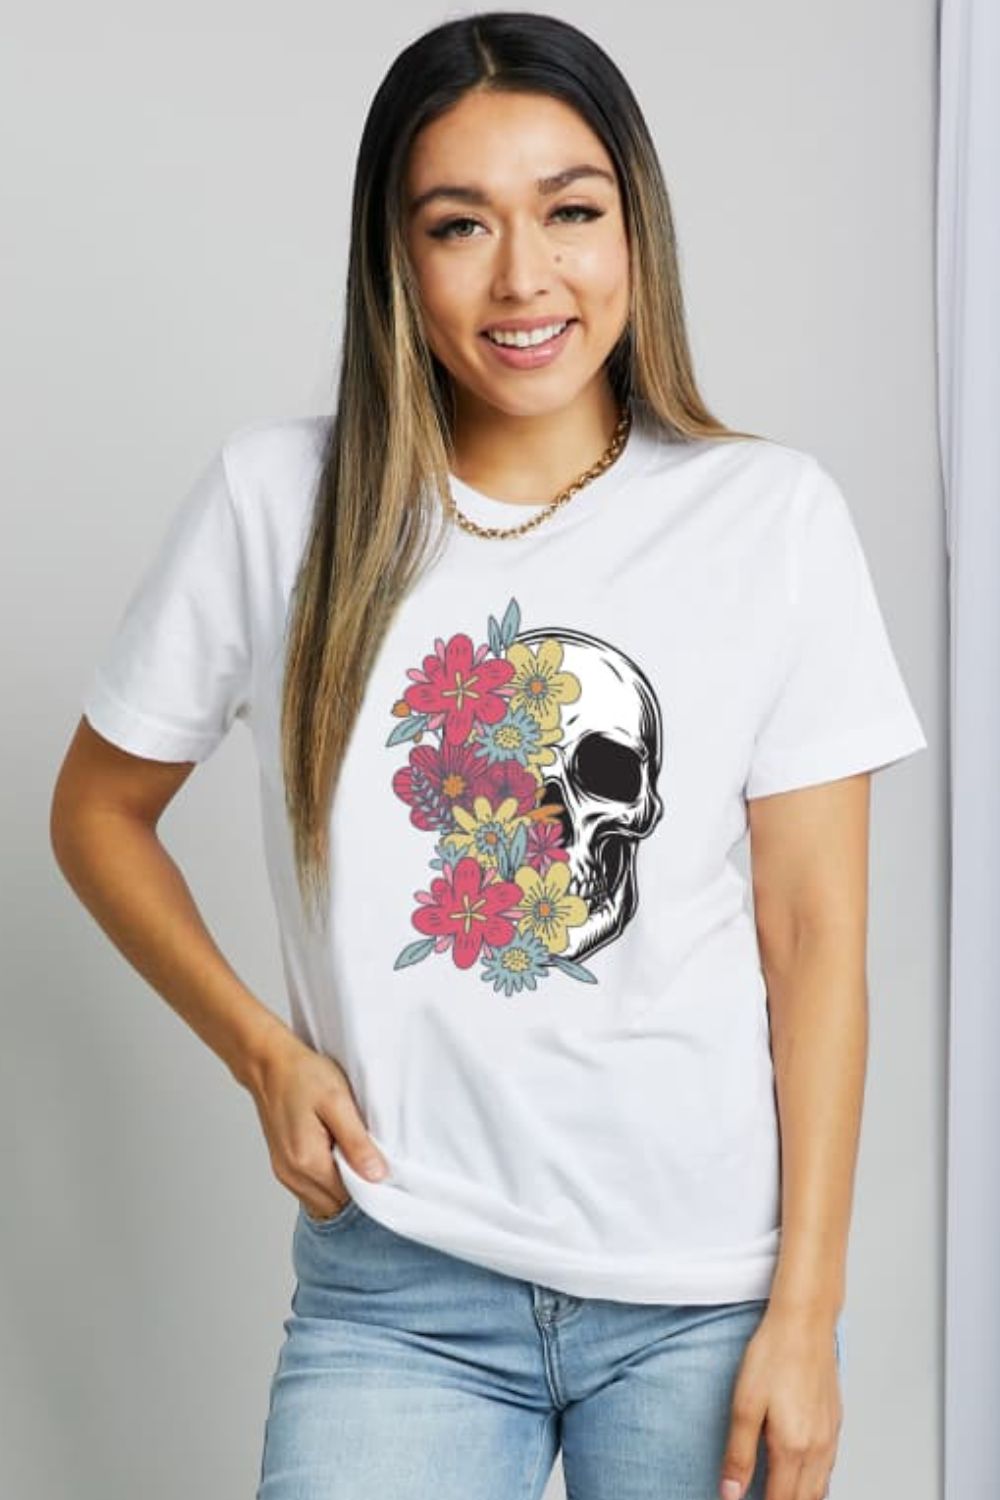 Simply Love Skull Graphic Cotton T-Shirt